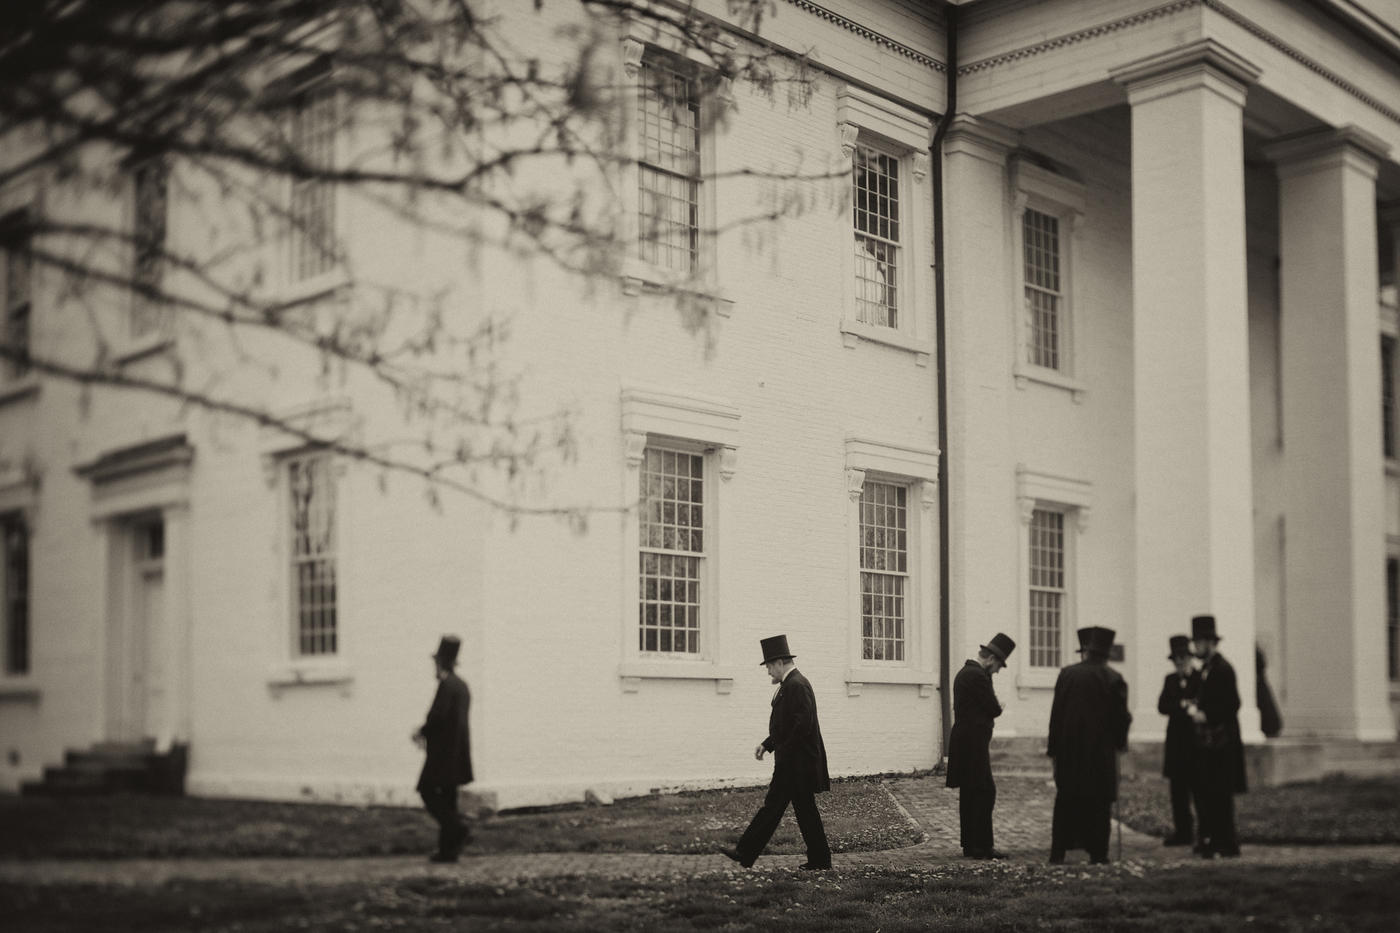 Milling about the Capital before the Forum. : The  Lincolns - a Convention : David Burnett | Photographer